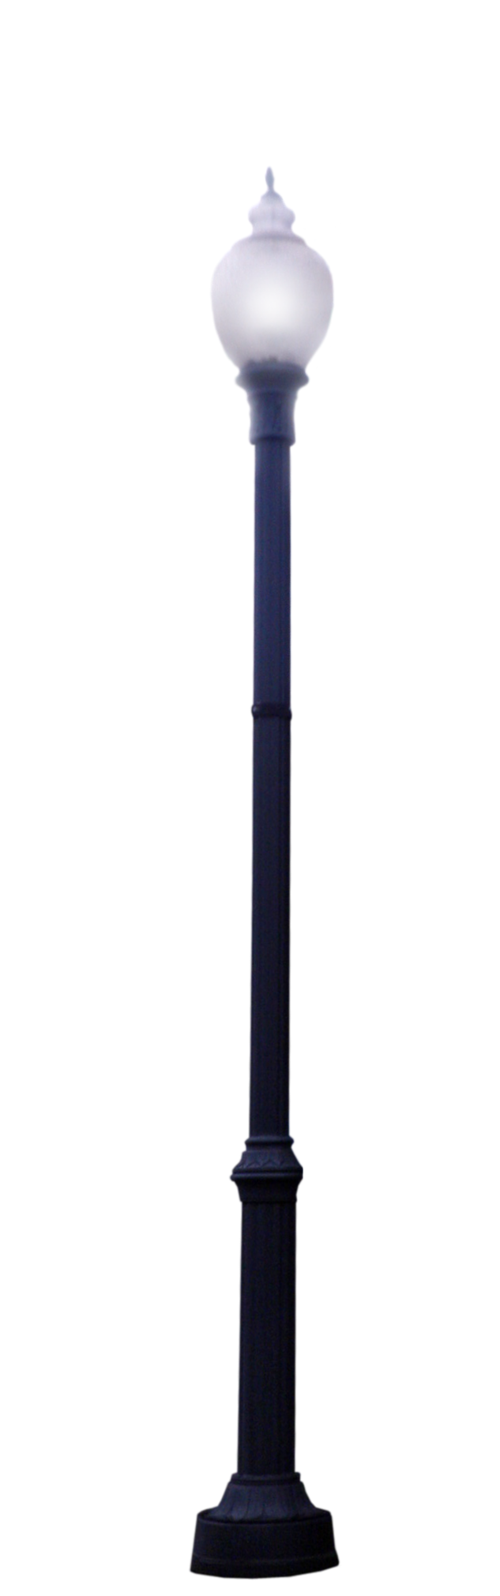 Street Light Png Glowing By Thy Darkest Hour Hdpng.com  - Streetlight, Transparent background PNG HD thumbnail